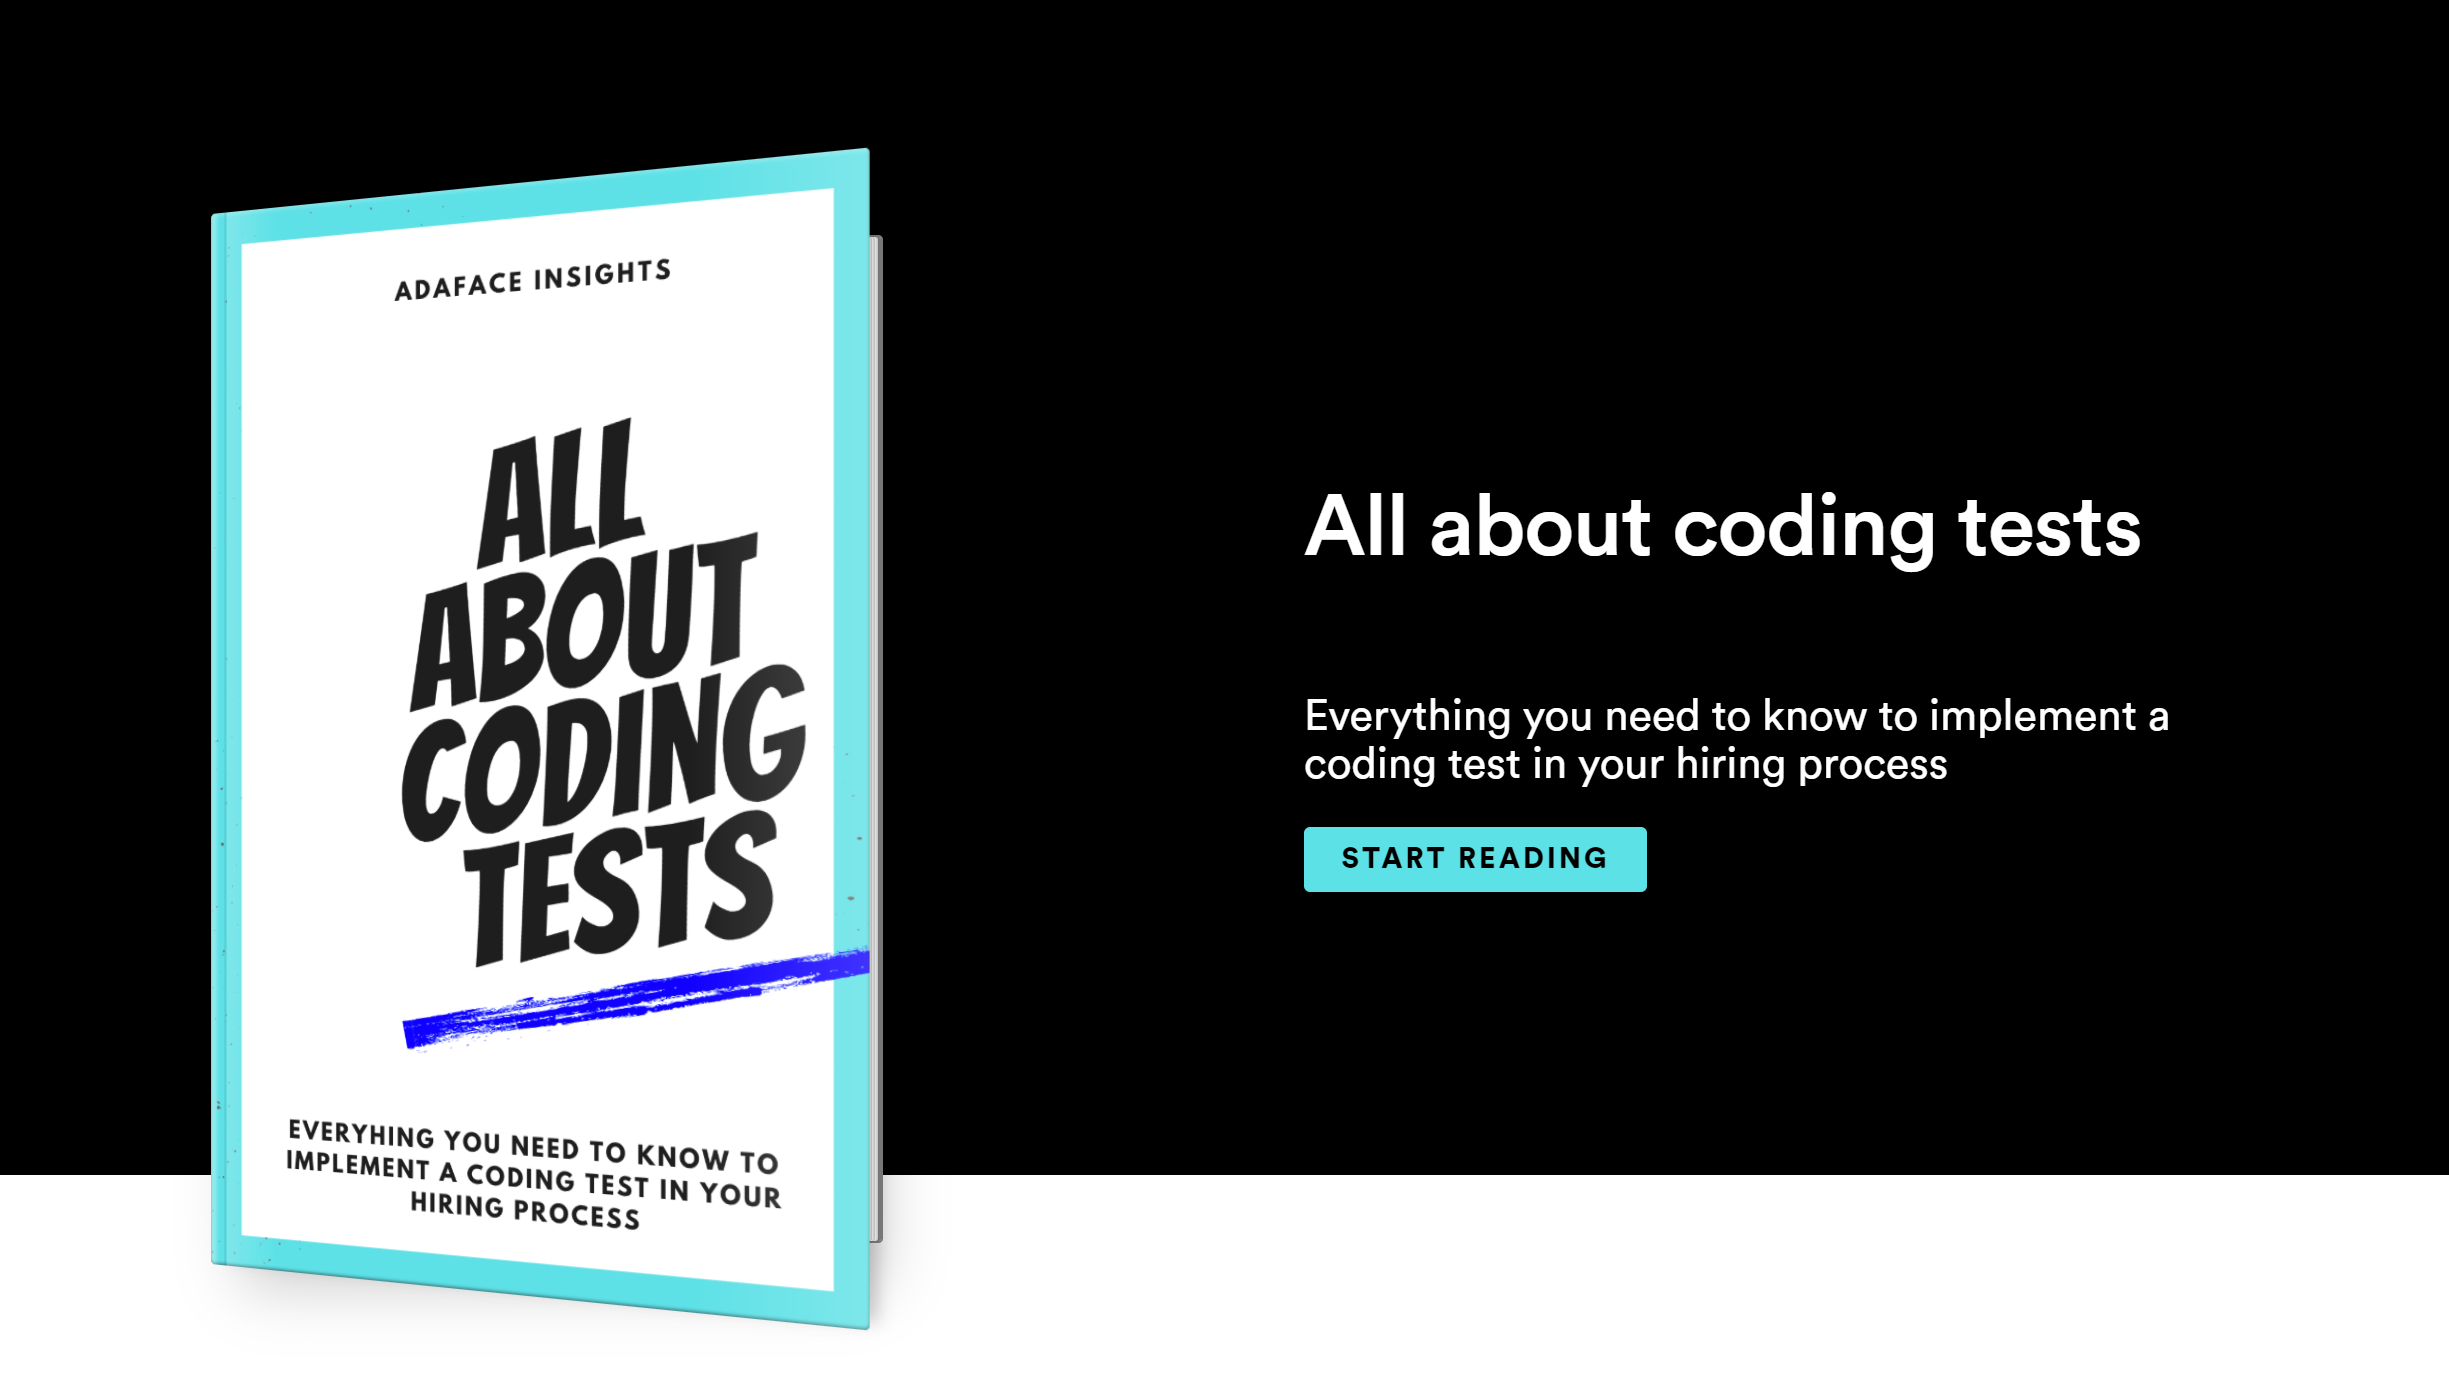 All about coding tests